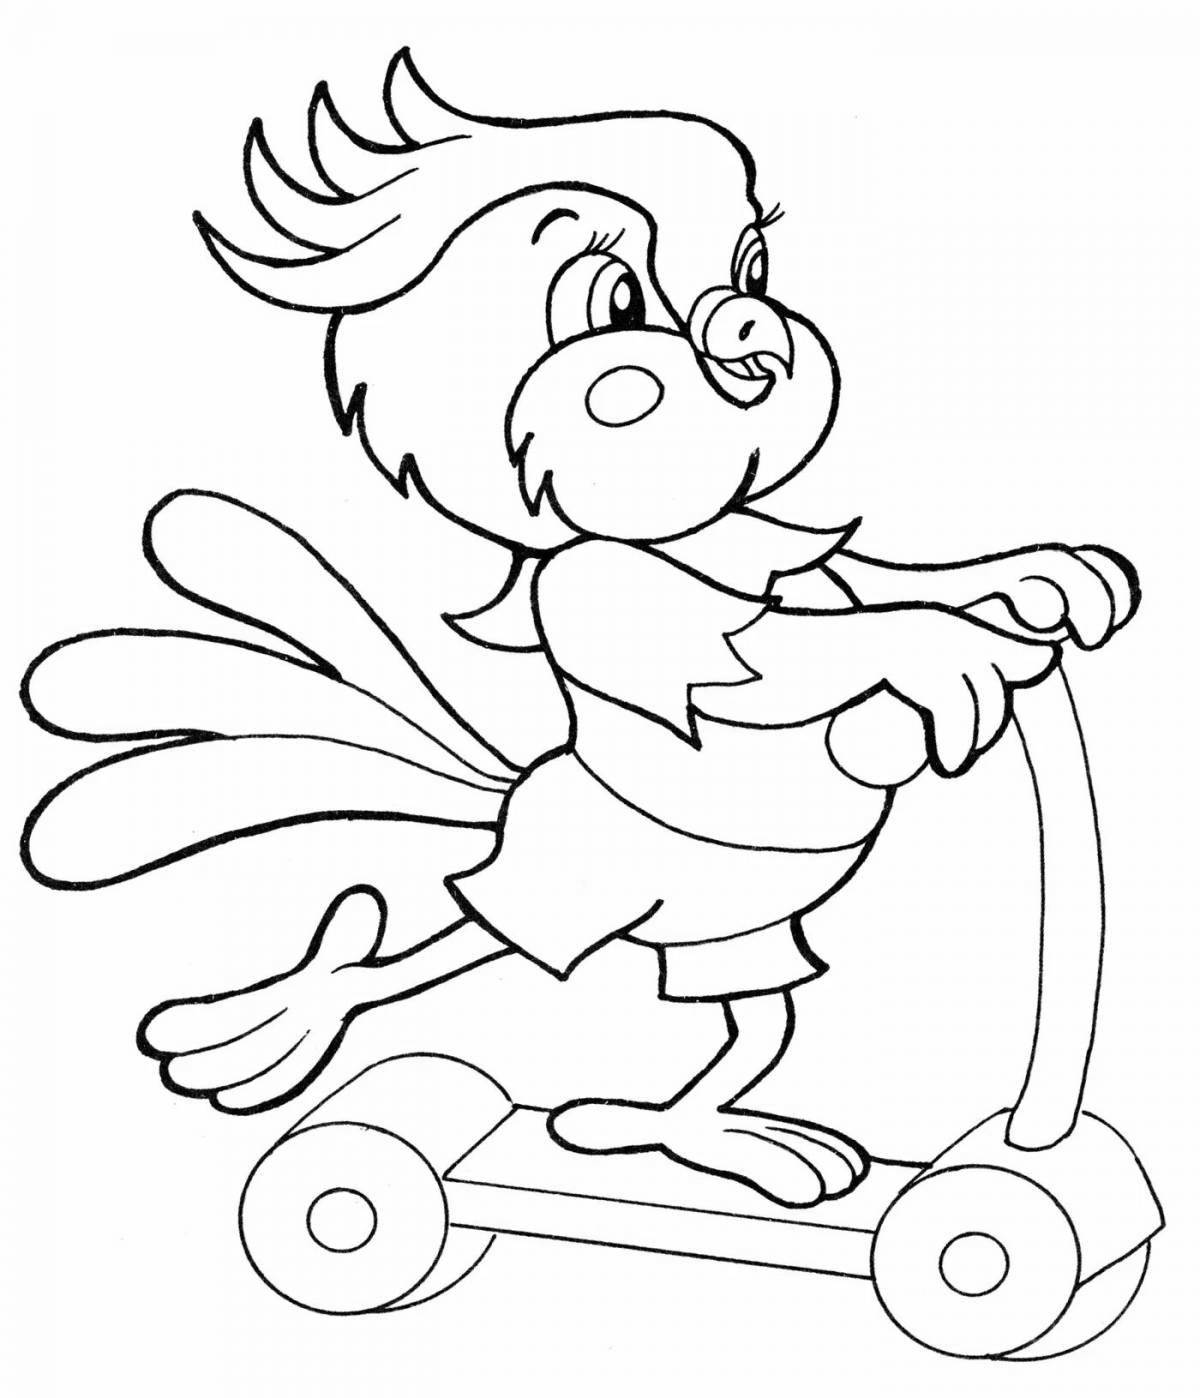 Coloring pages with scooters for kids